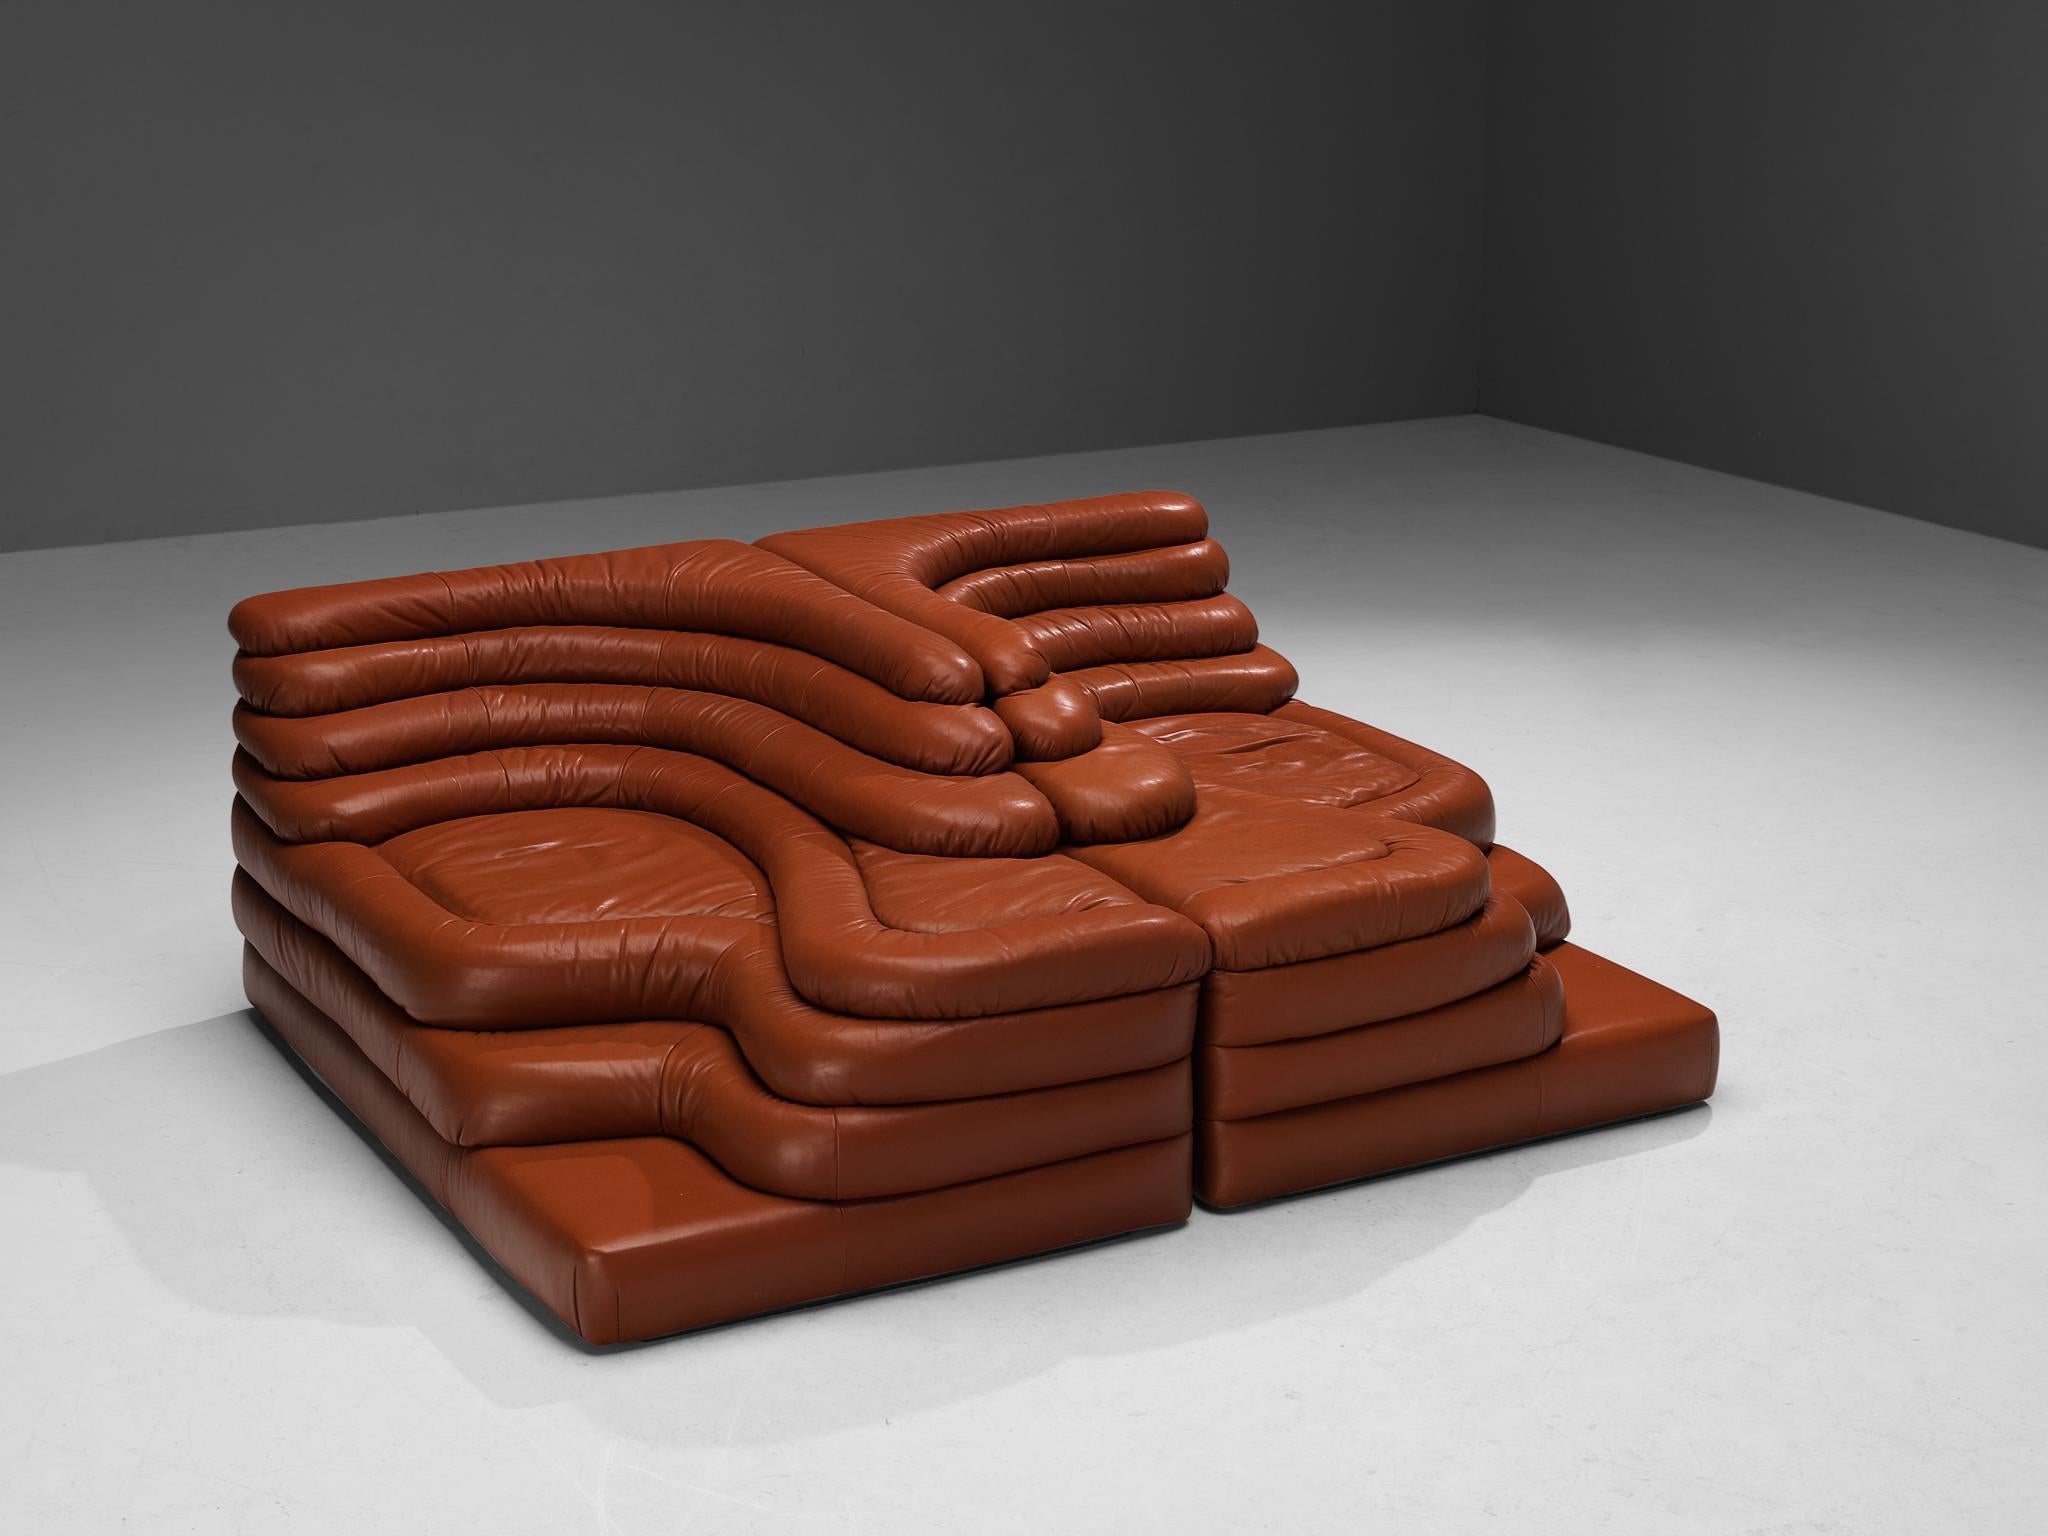 Ubald Klug for De Sede, DS-1025 'Terrazza' landscape sofas, in red leather, Switzerland, 1970s. 

Waterfall shaped sofa in red brown leather by the Swiss manufacturer De Sede. The design for this sofa was inspired by mountains and especially the